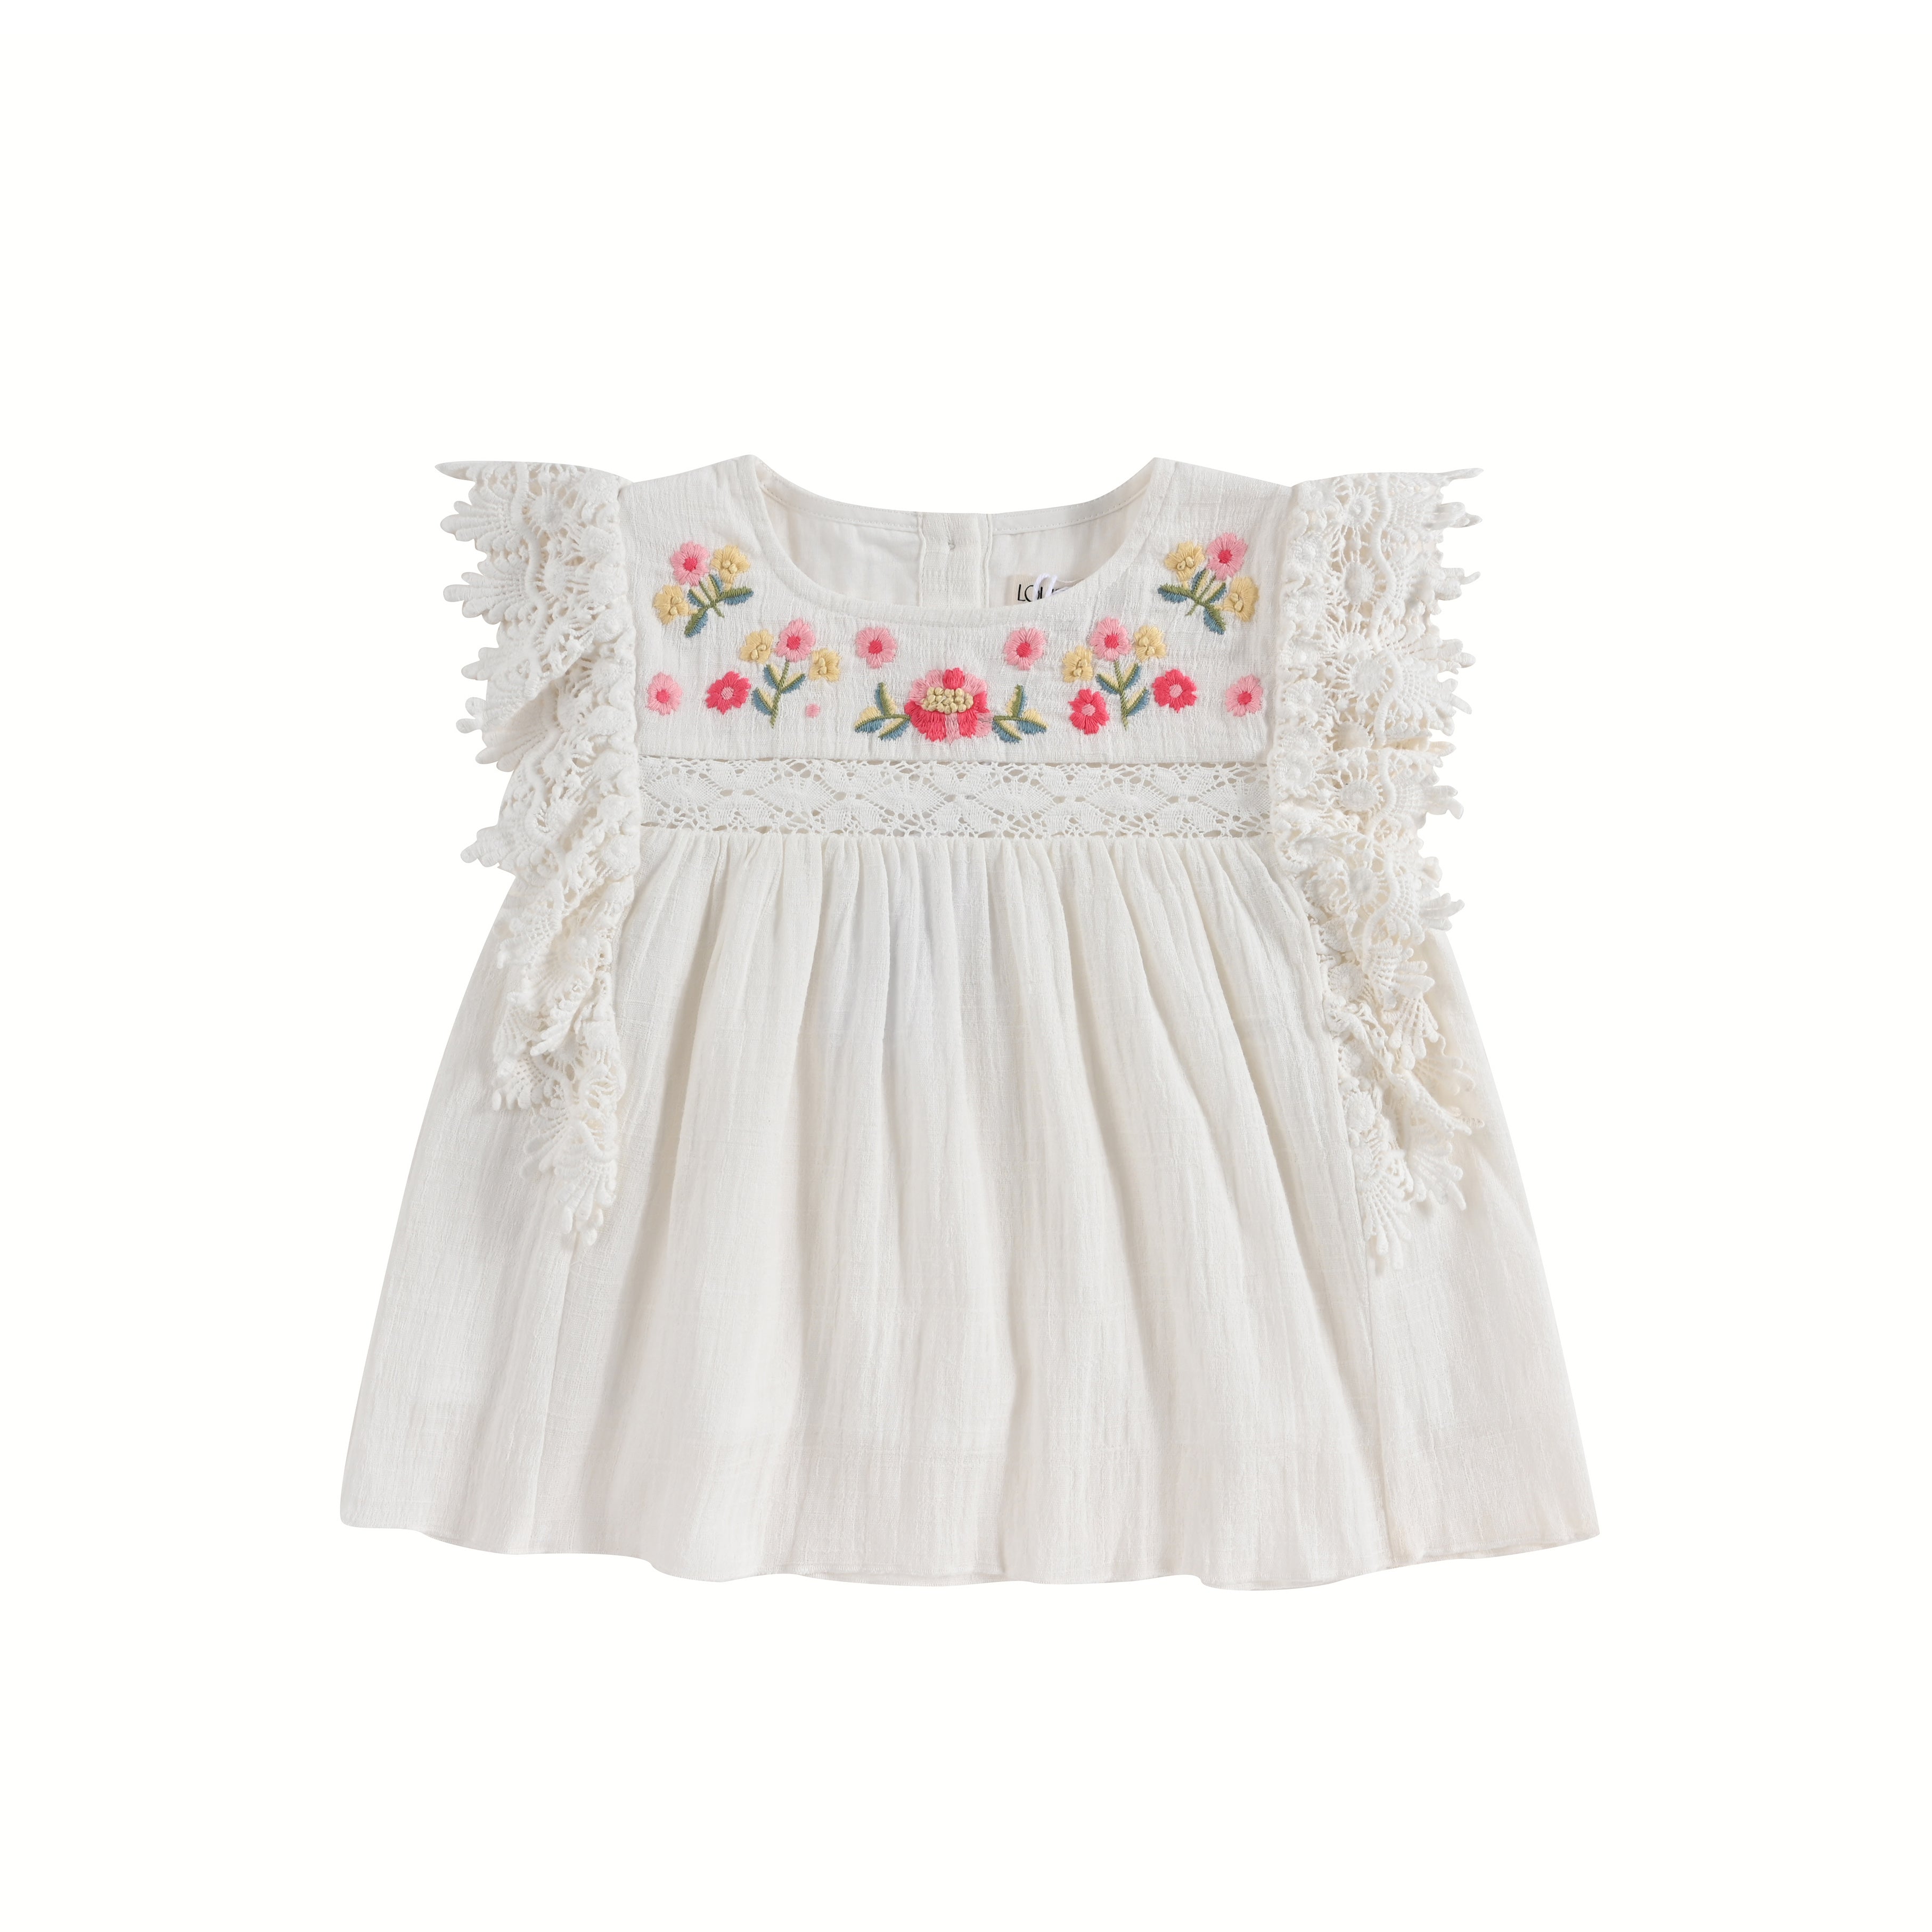 Girls White Embroidery Cotton Tops